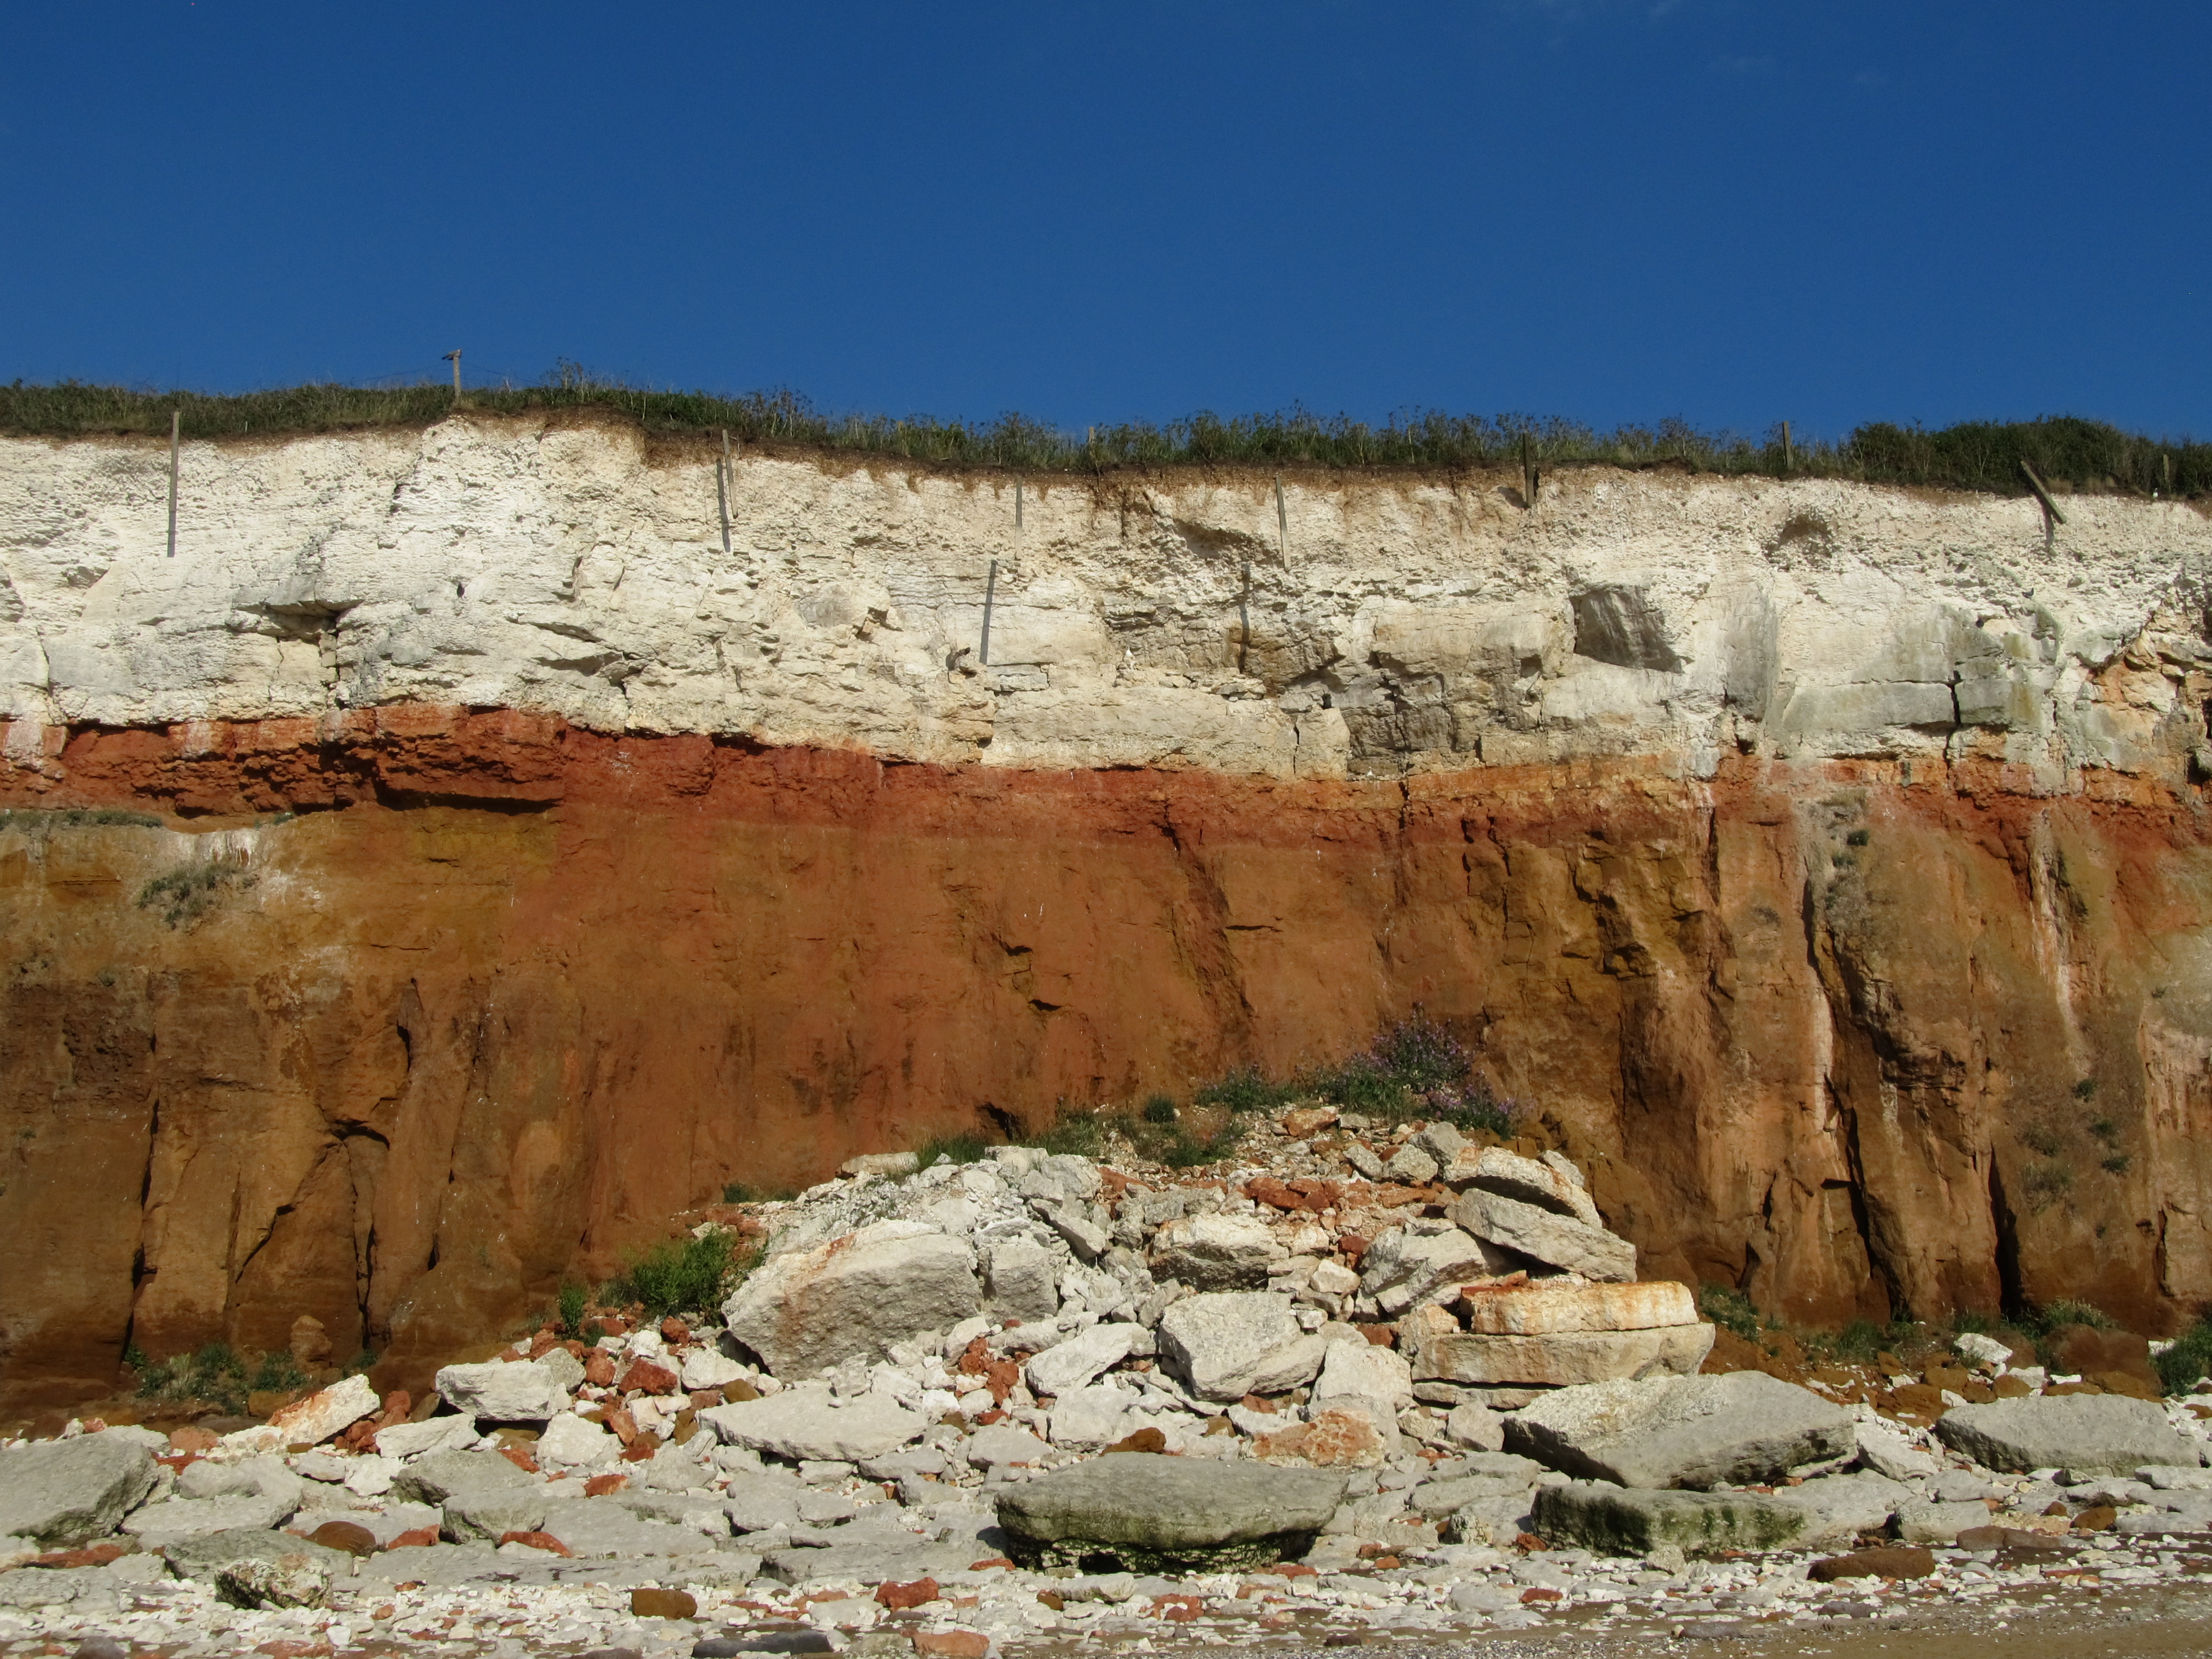 The Hunstanton cliff and impact of storm surges